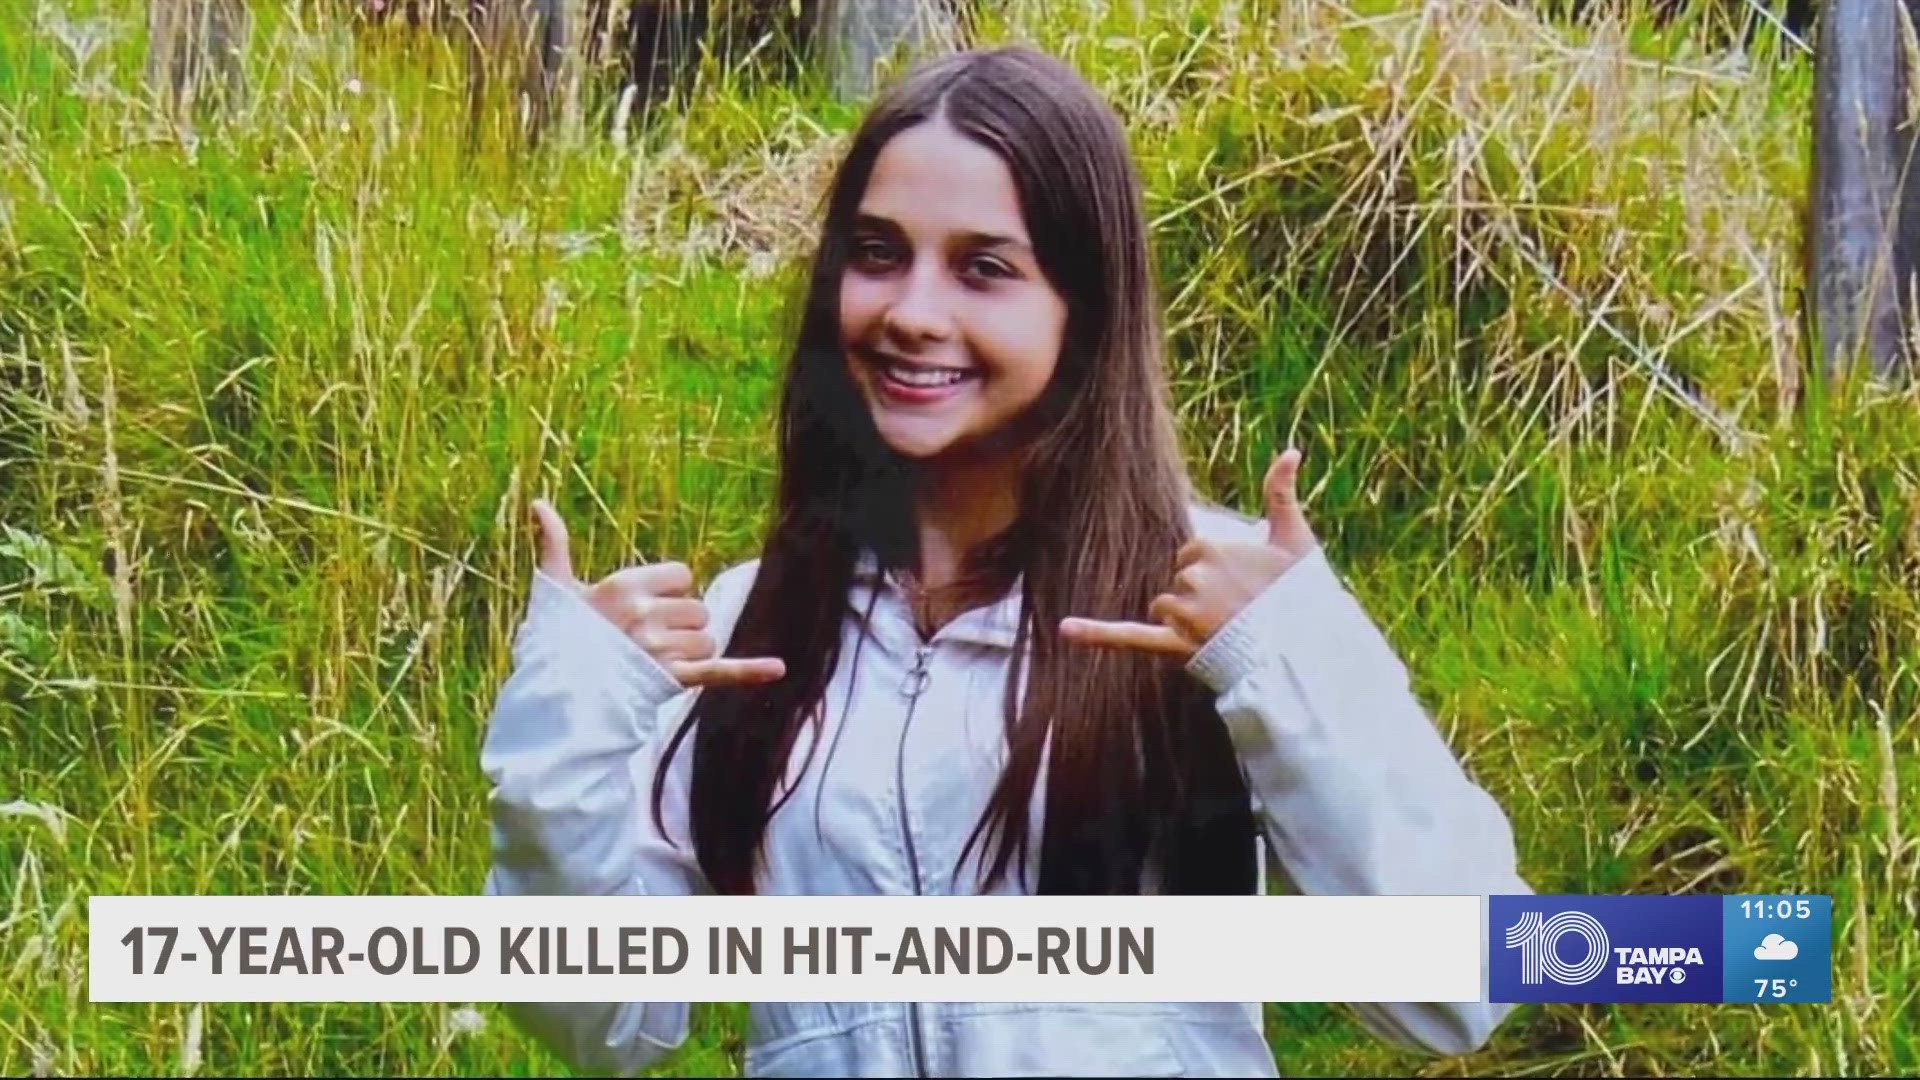 17-year-old Mia Schoen of Pompano Beach was visiting Tarpon Springs with friends when she was hit and killed while crossing the street early Tuesday morning.